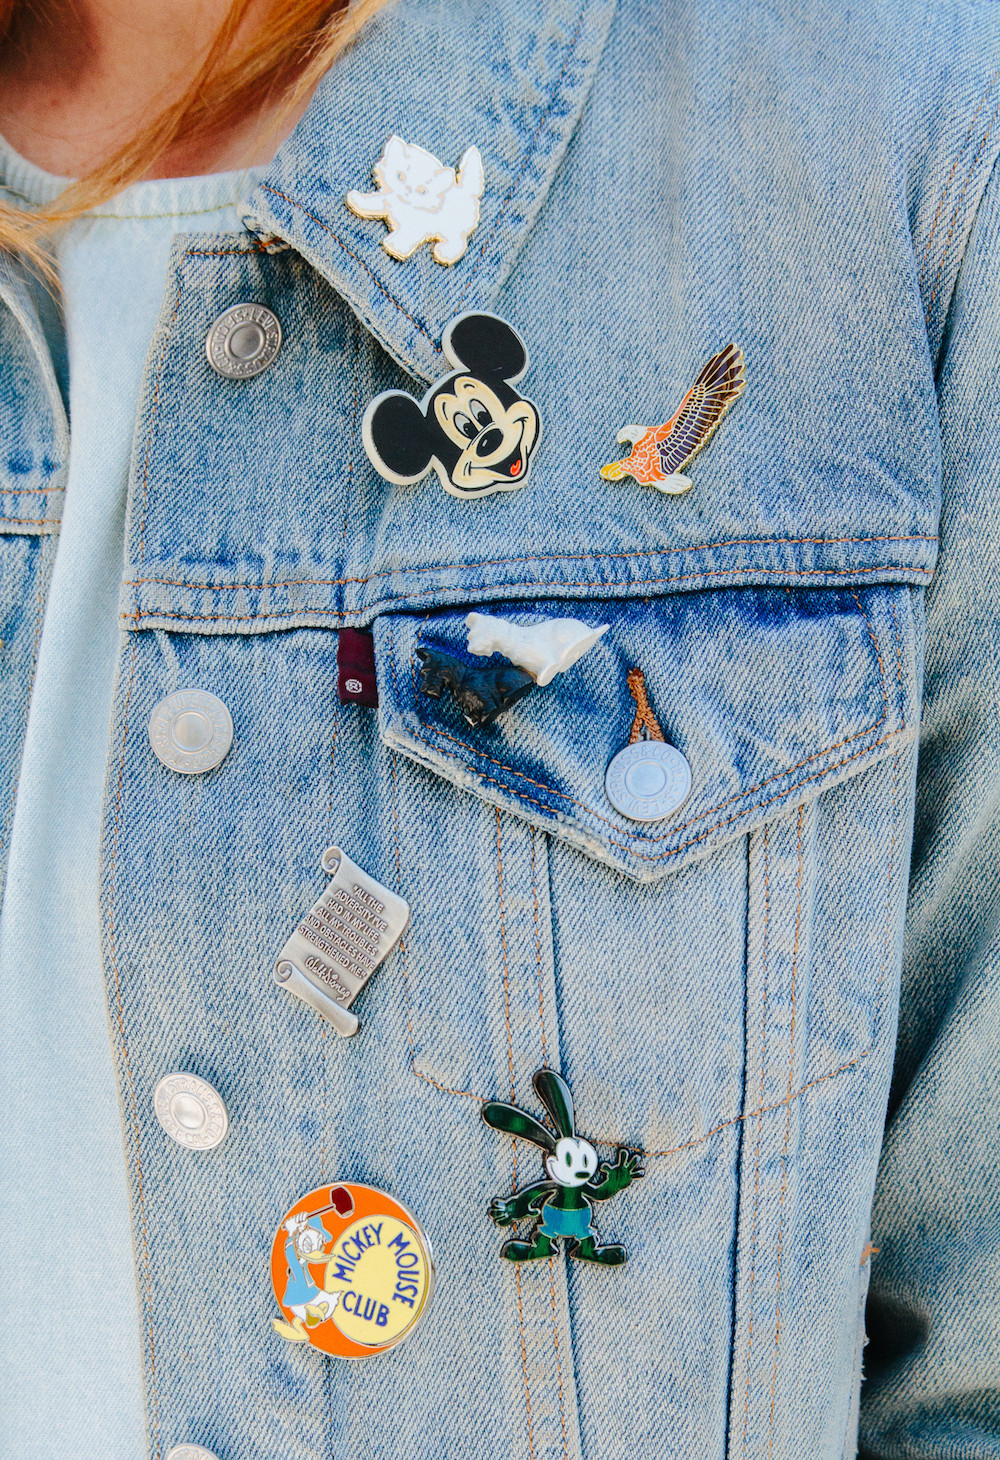 Pins On Denim Jacket
 9 Tips for Styling Your Disney Pins